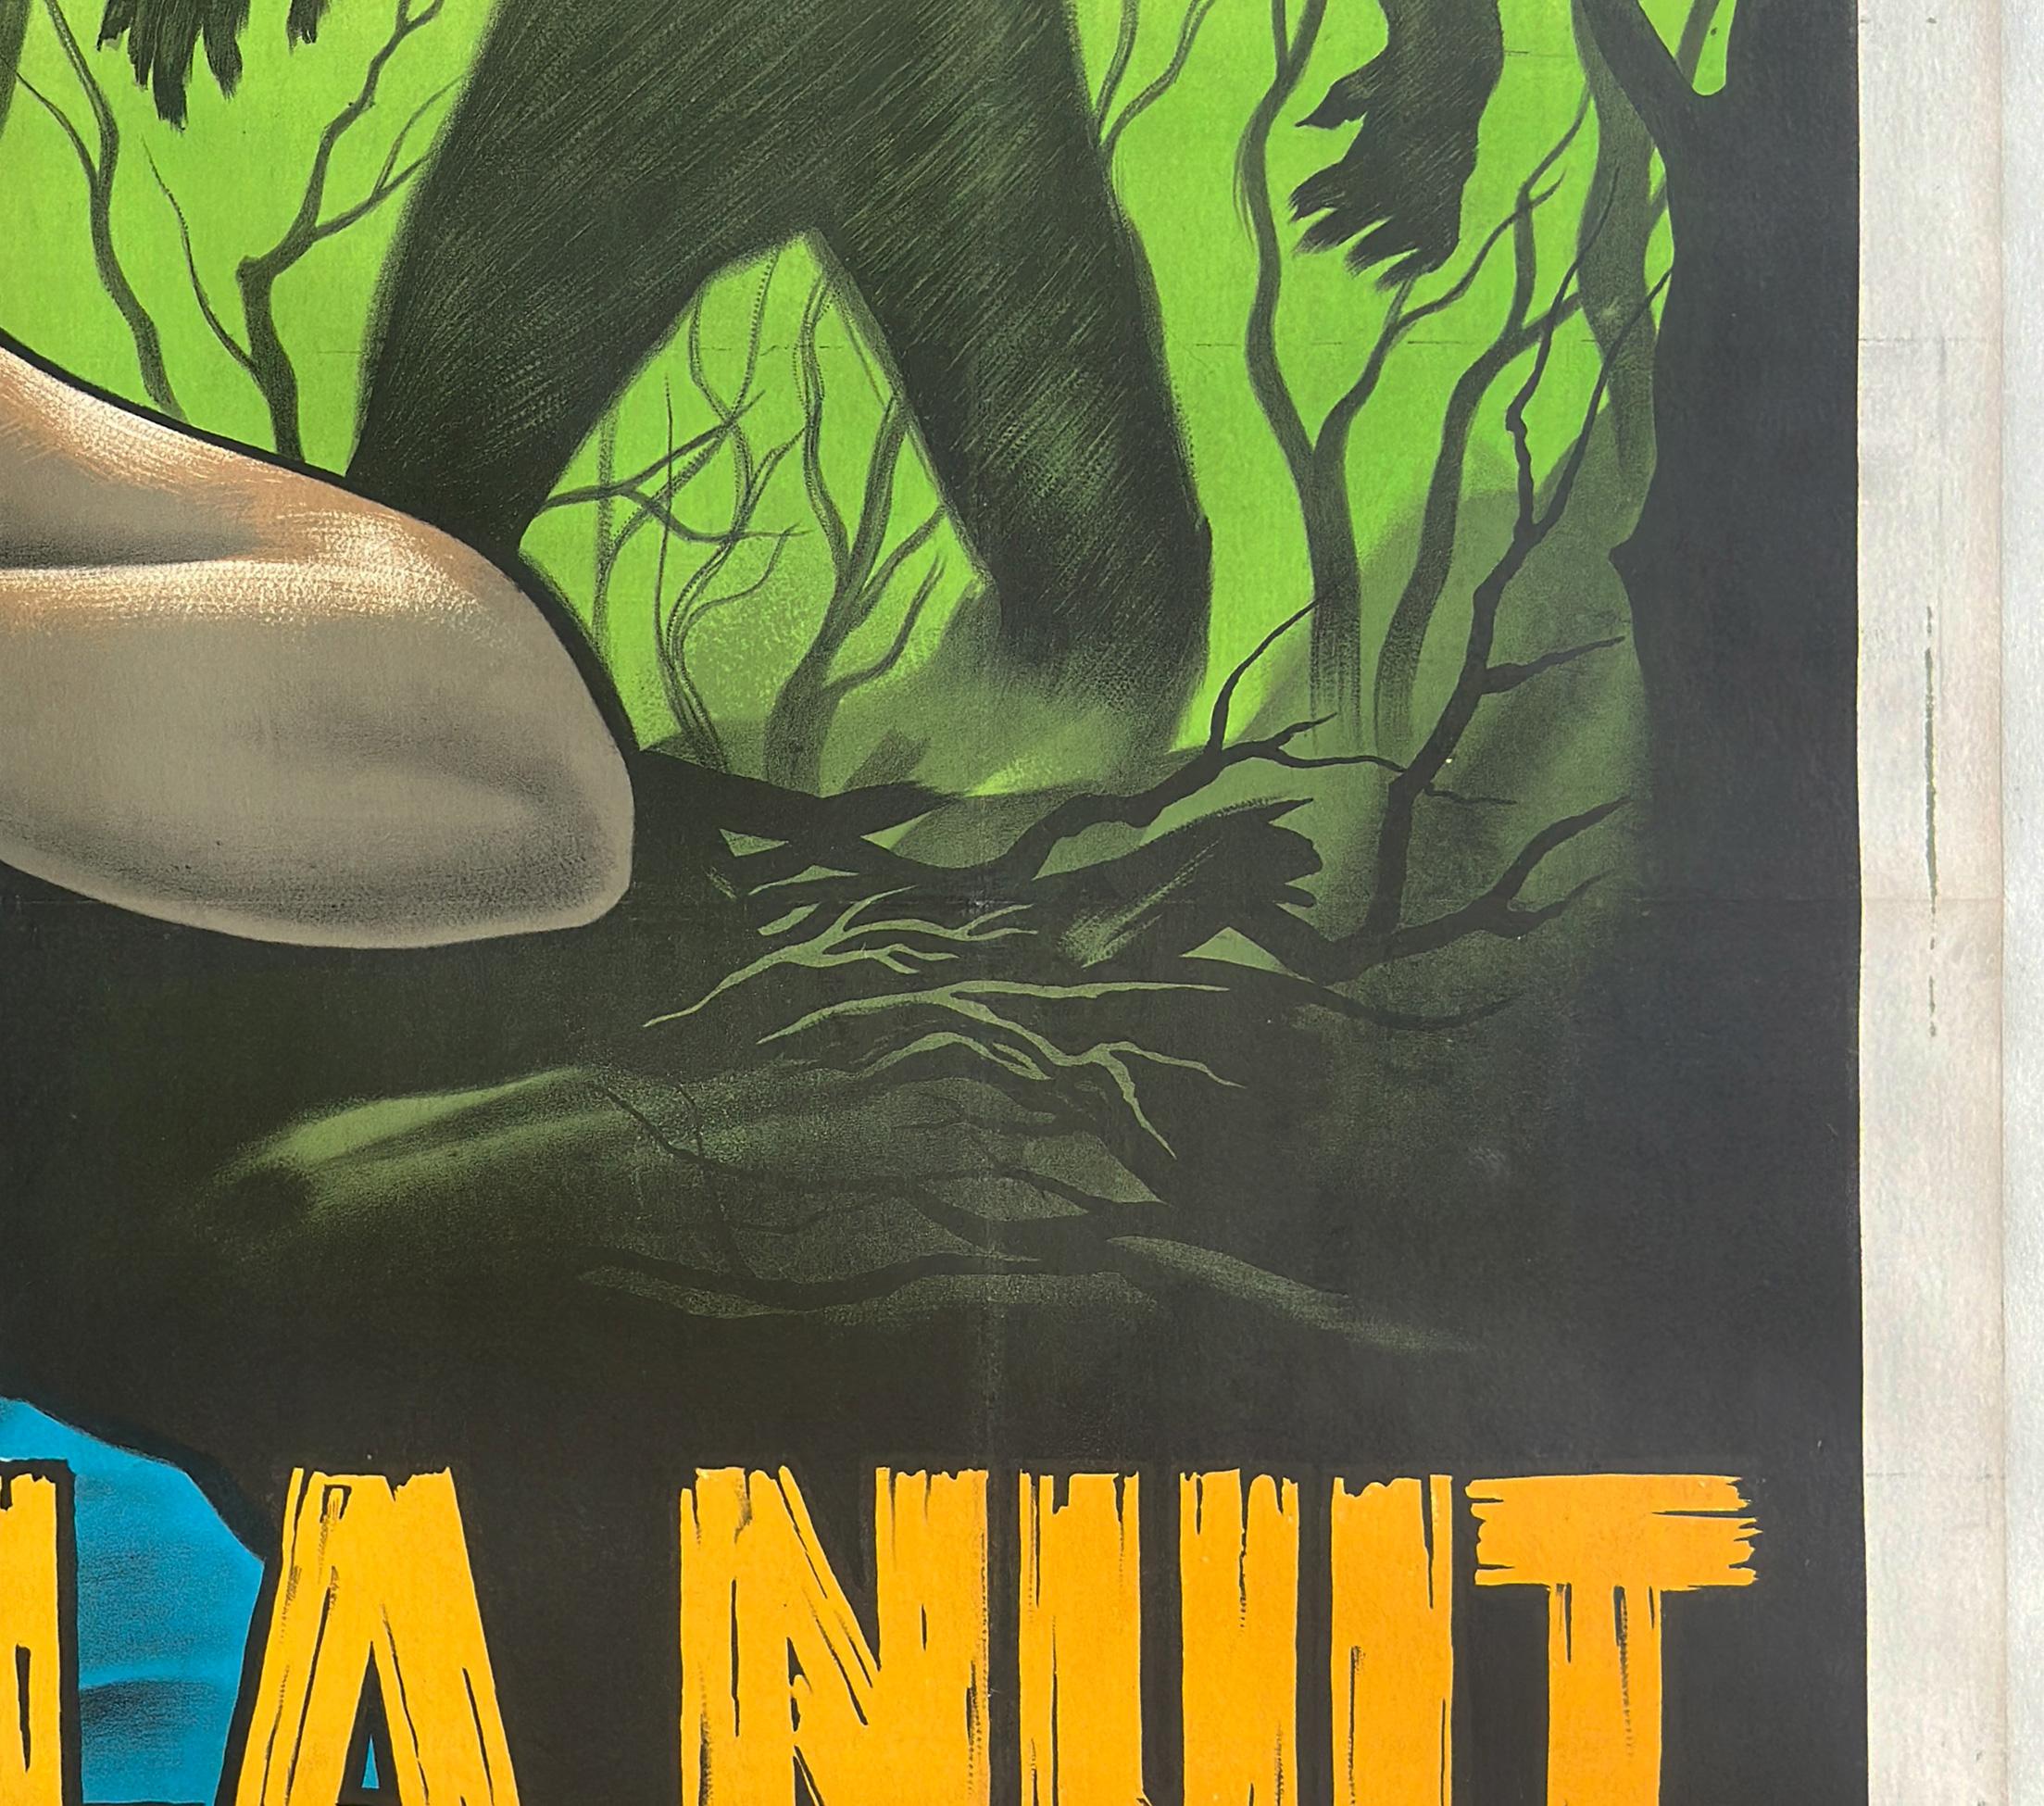 The Curse of the Werewolf 1961 French Grande Film Poster, Guy Gerard Noel In Good Condition For Sale In Bath, Somerset